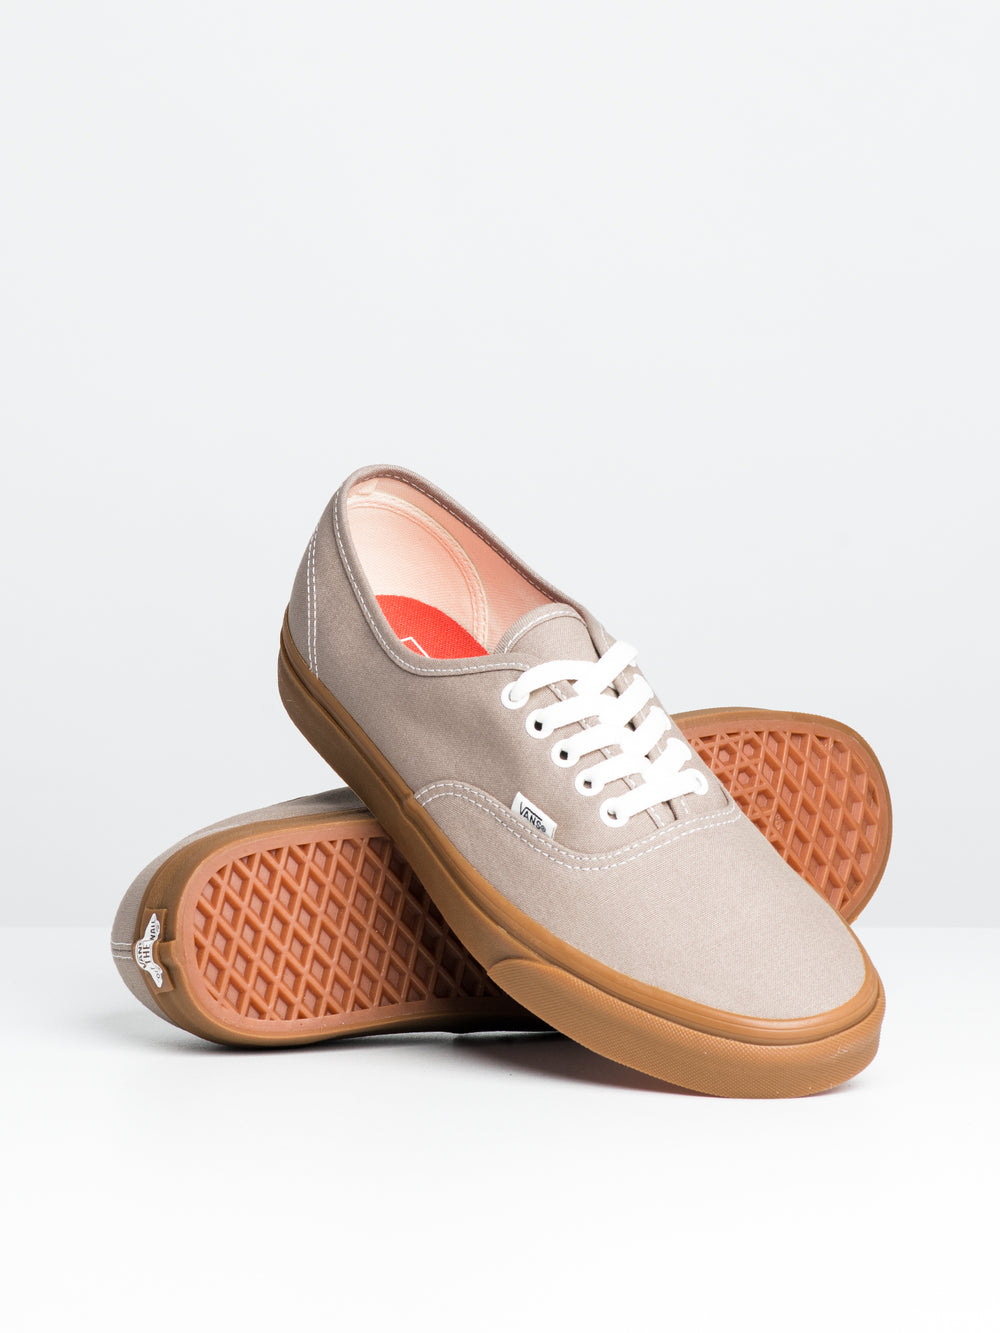 MENS AUTHENTIC SNEAKER - CLEARANCE